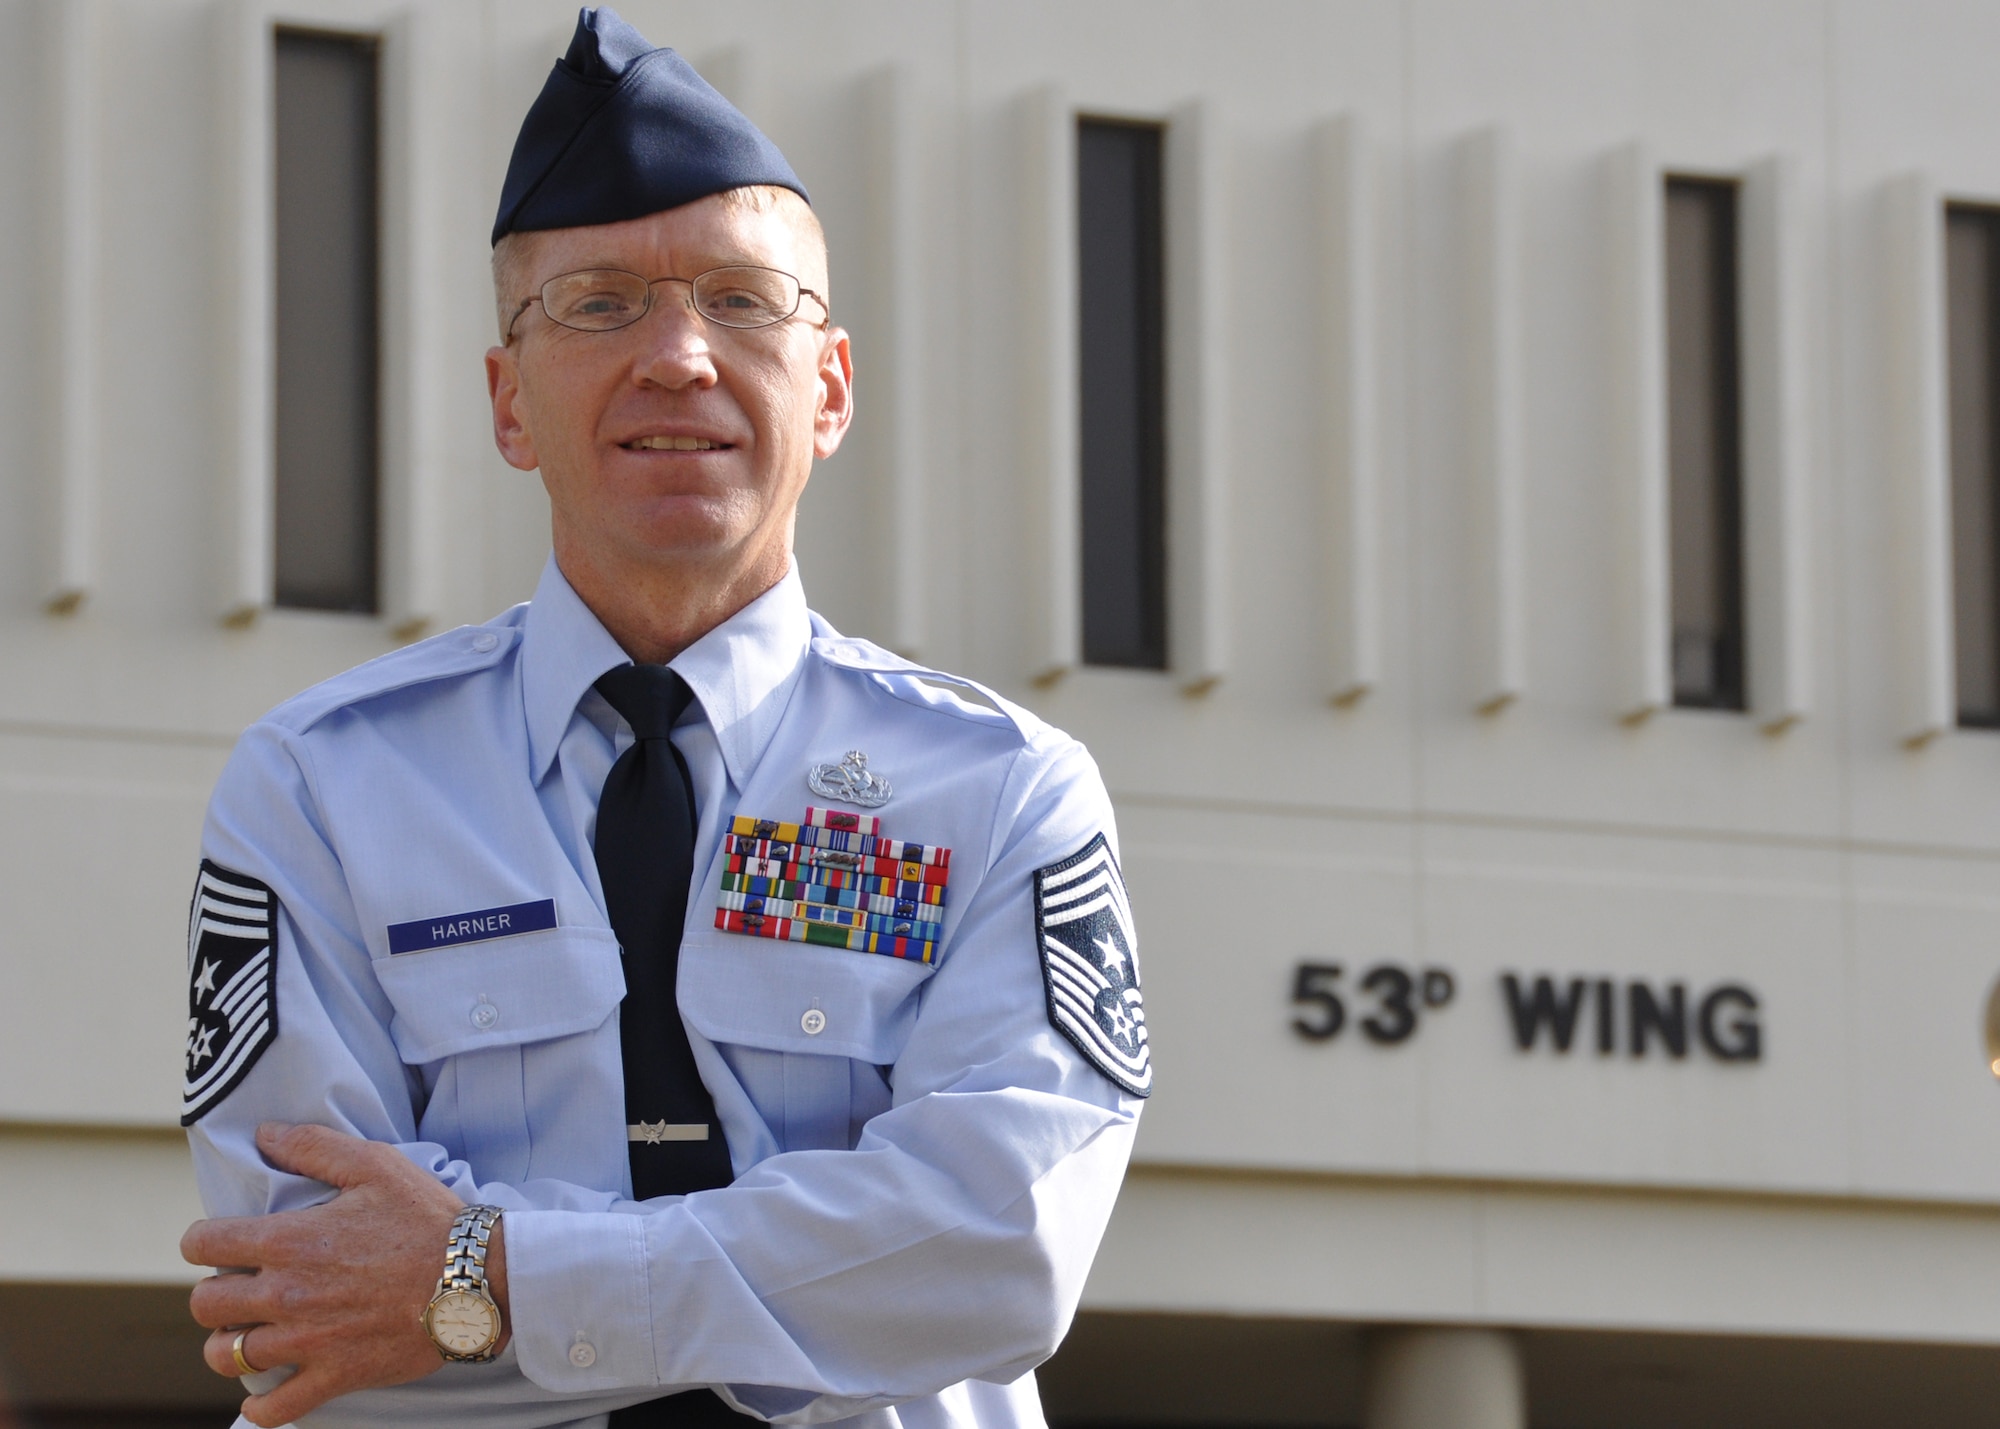 Chief Master Sgt. William Harner is the 53rd Wing's newest command chief.  He hopes to use his world-travelled experience to provide leadership and support for the Airmen of the 53rd Wing.  (Air Force photo/Ashley Wright.)